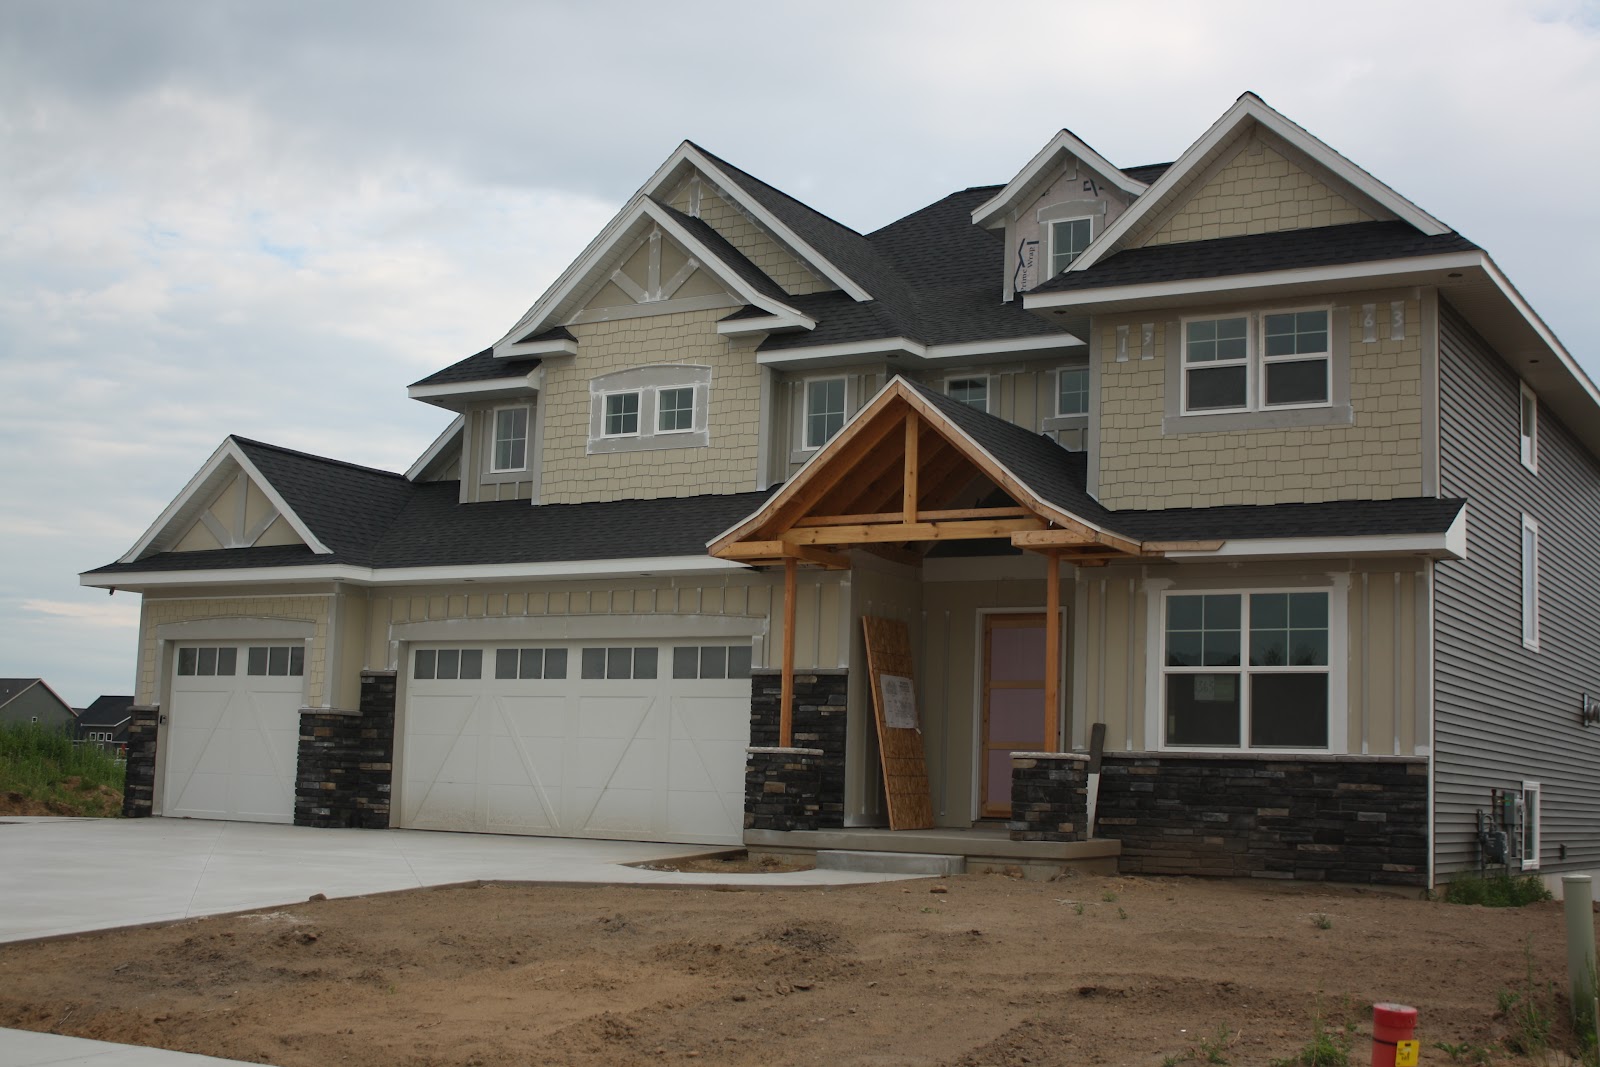 house colors ideas The Build: Exterior Stone, Siding, and Driveway Oh My!